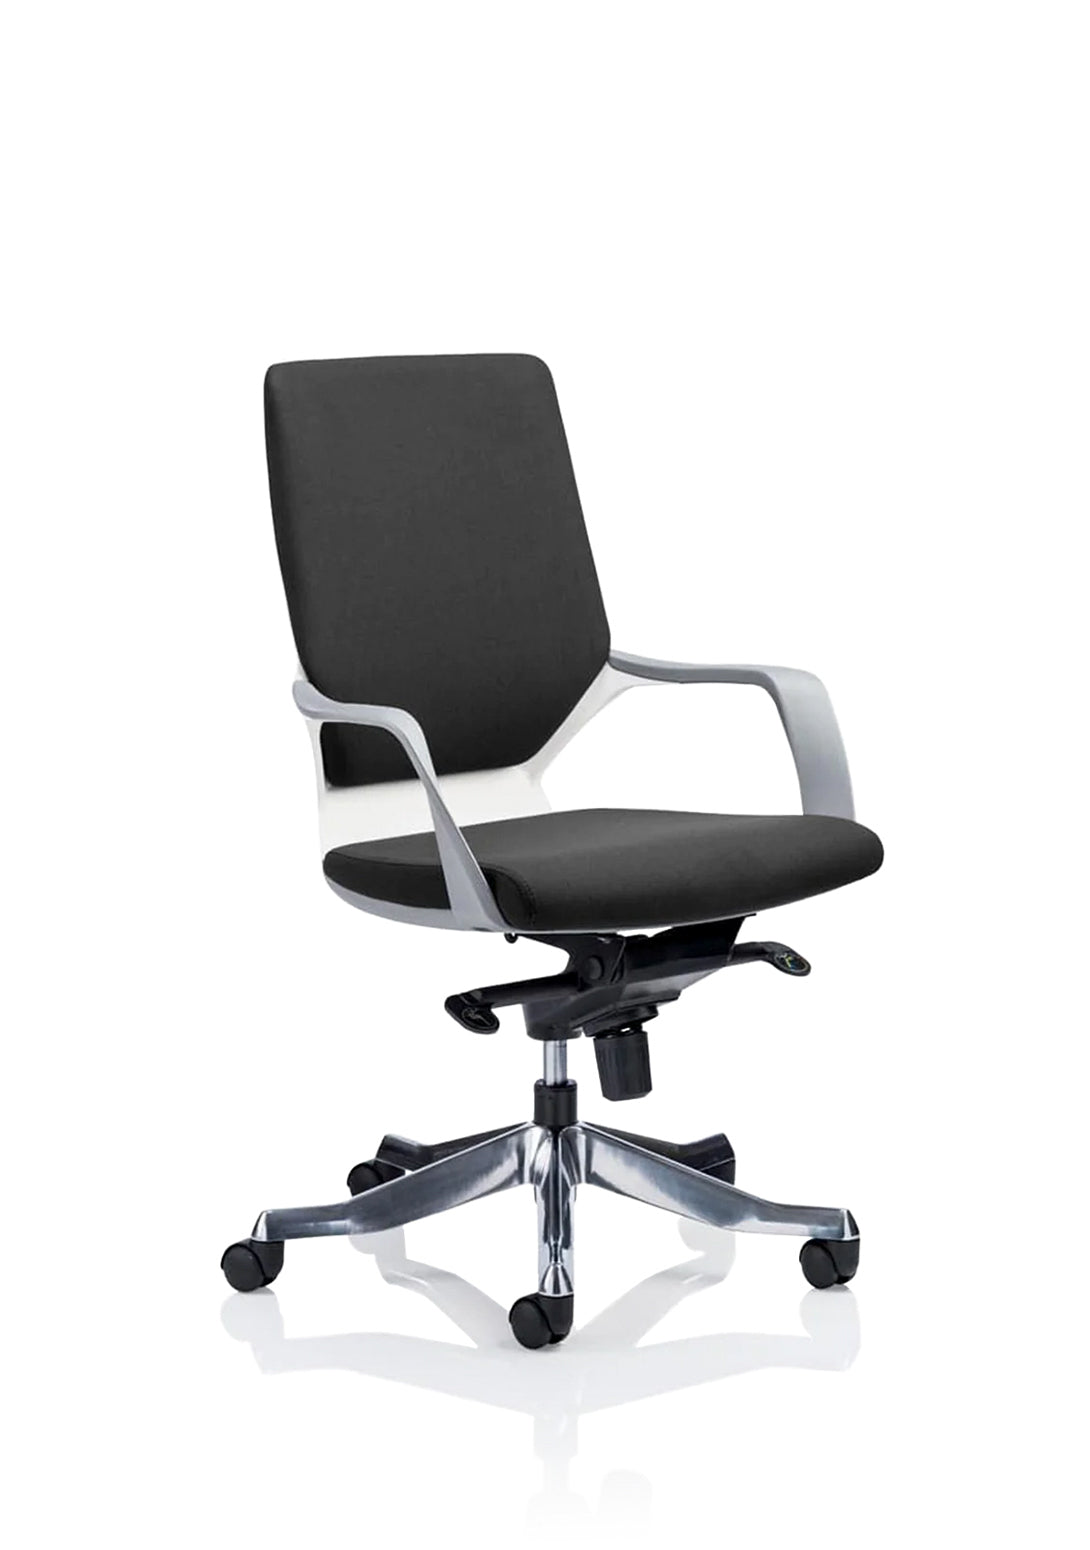 Xenon Executive Chair White Shell Black Fabric Medium Back With Arms